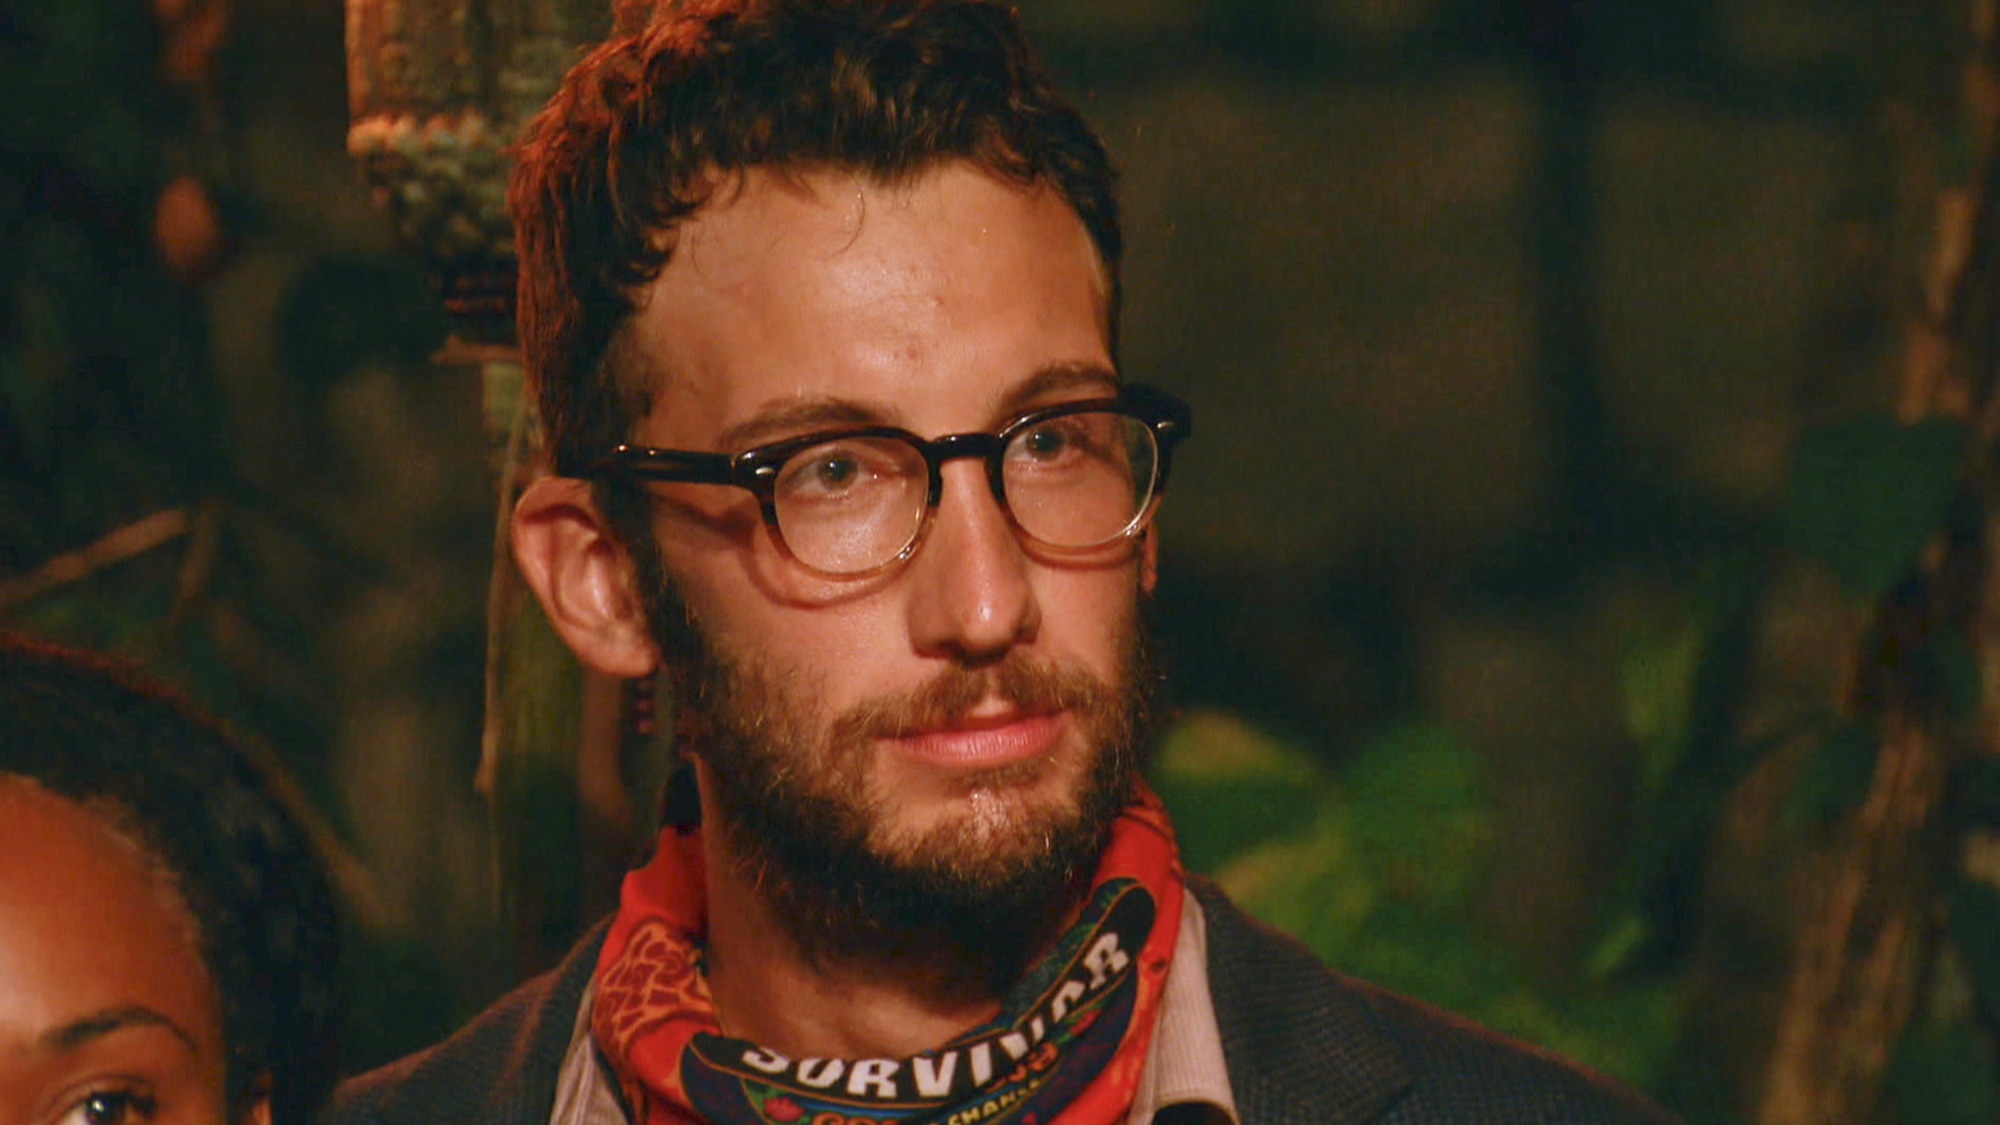 Stephen Fishbach is on tribal council